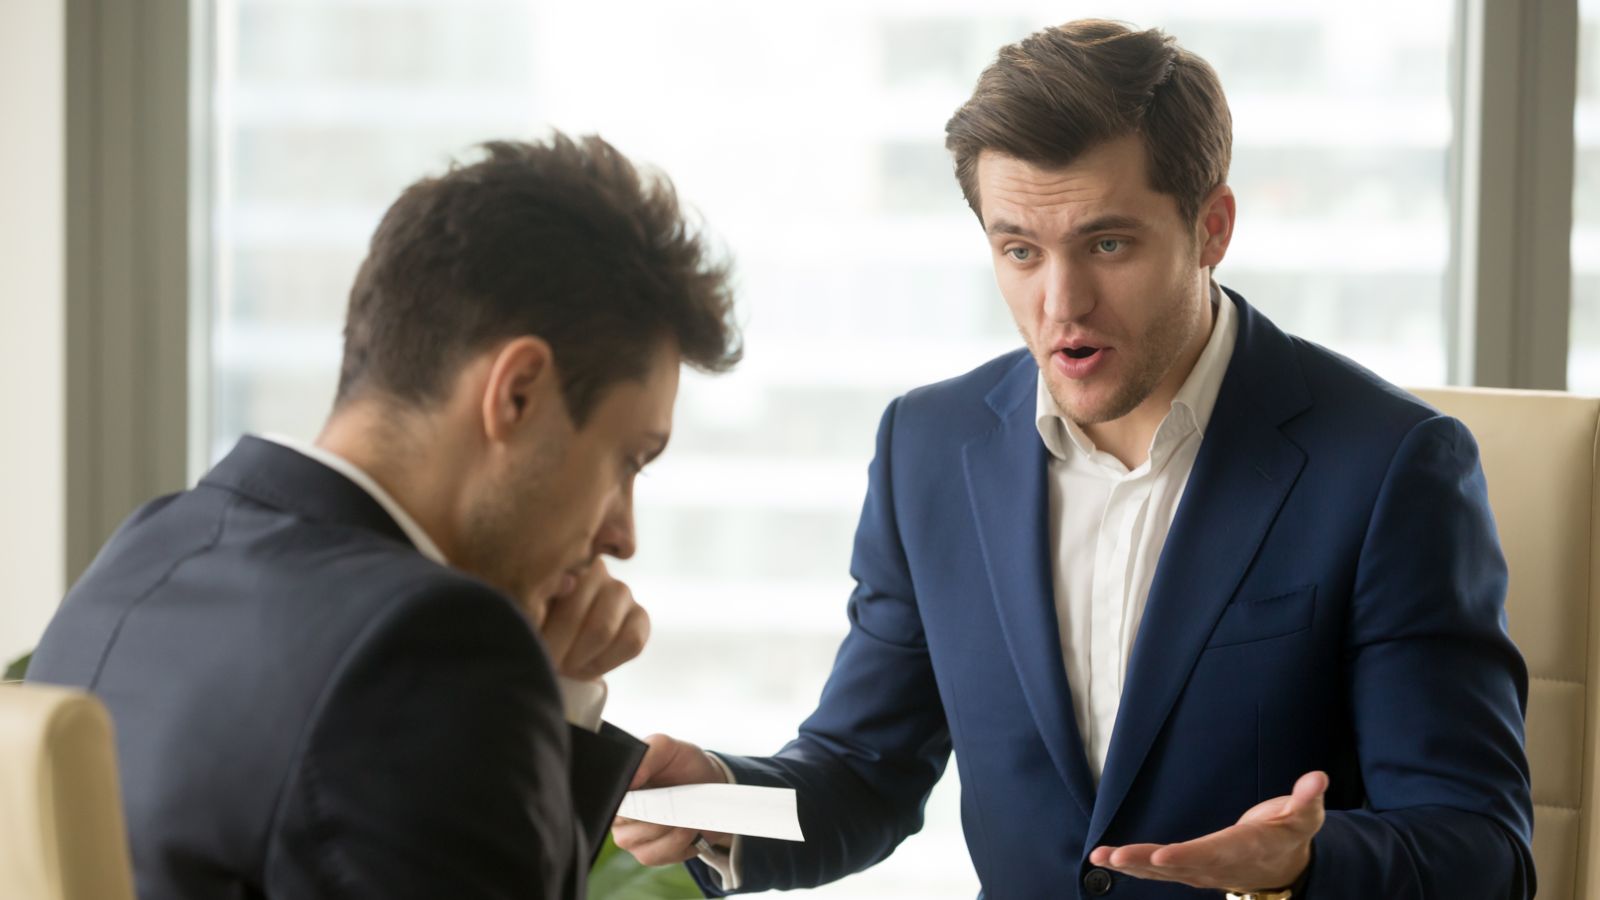 <p>The workplace should be a professional environment free from discrimination and harassment. While employers have the authority to ask questions regarding legal work obligations, there are certain personal boundaries they cannot cross. Whether it's an invasion of privacy or an unfair request, here are 20 examples of things your boss is legally prohibited from asking of you.</p><p><a href="https://happyfarmyard.com/20-things-your-boss-is-legally-forbidden-to-ask-of-you/"><strong>20 Things Your Boss Is Legally Forbidden to Ask of You</strong></a></p>